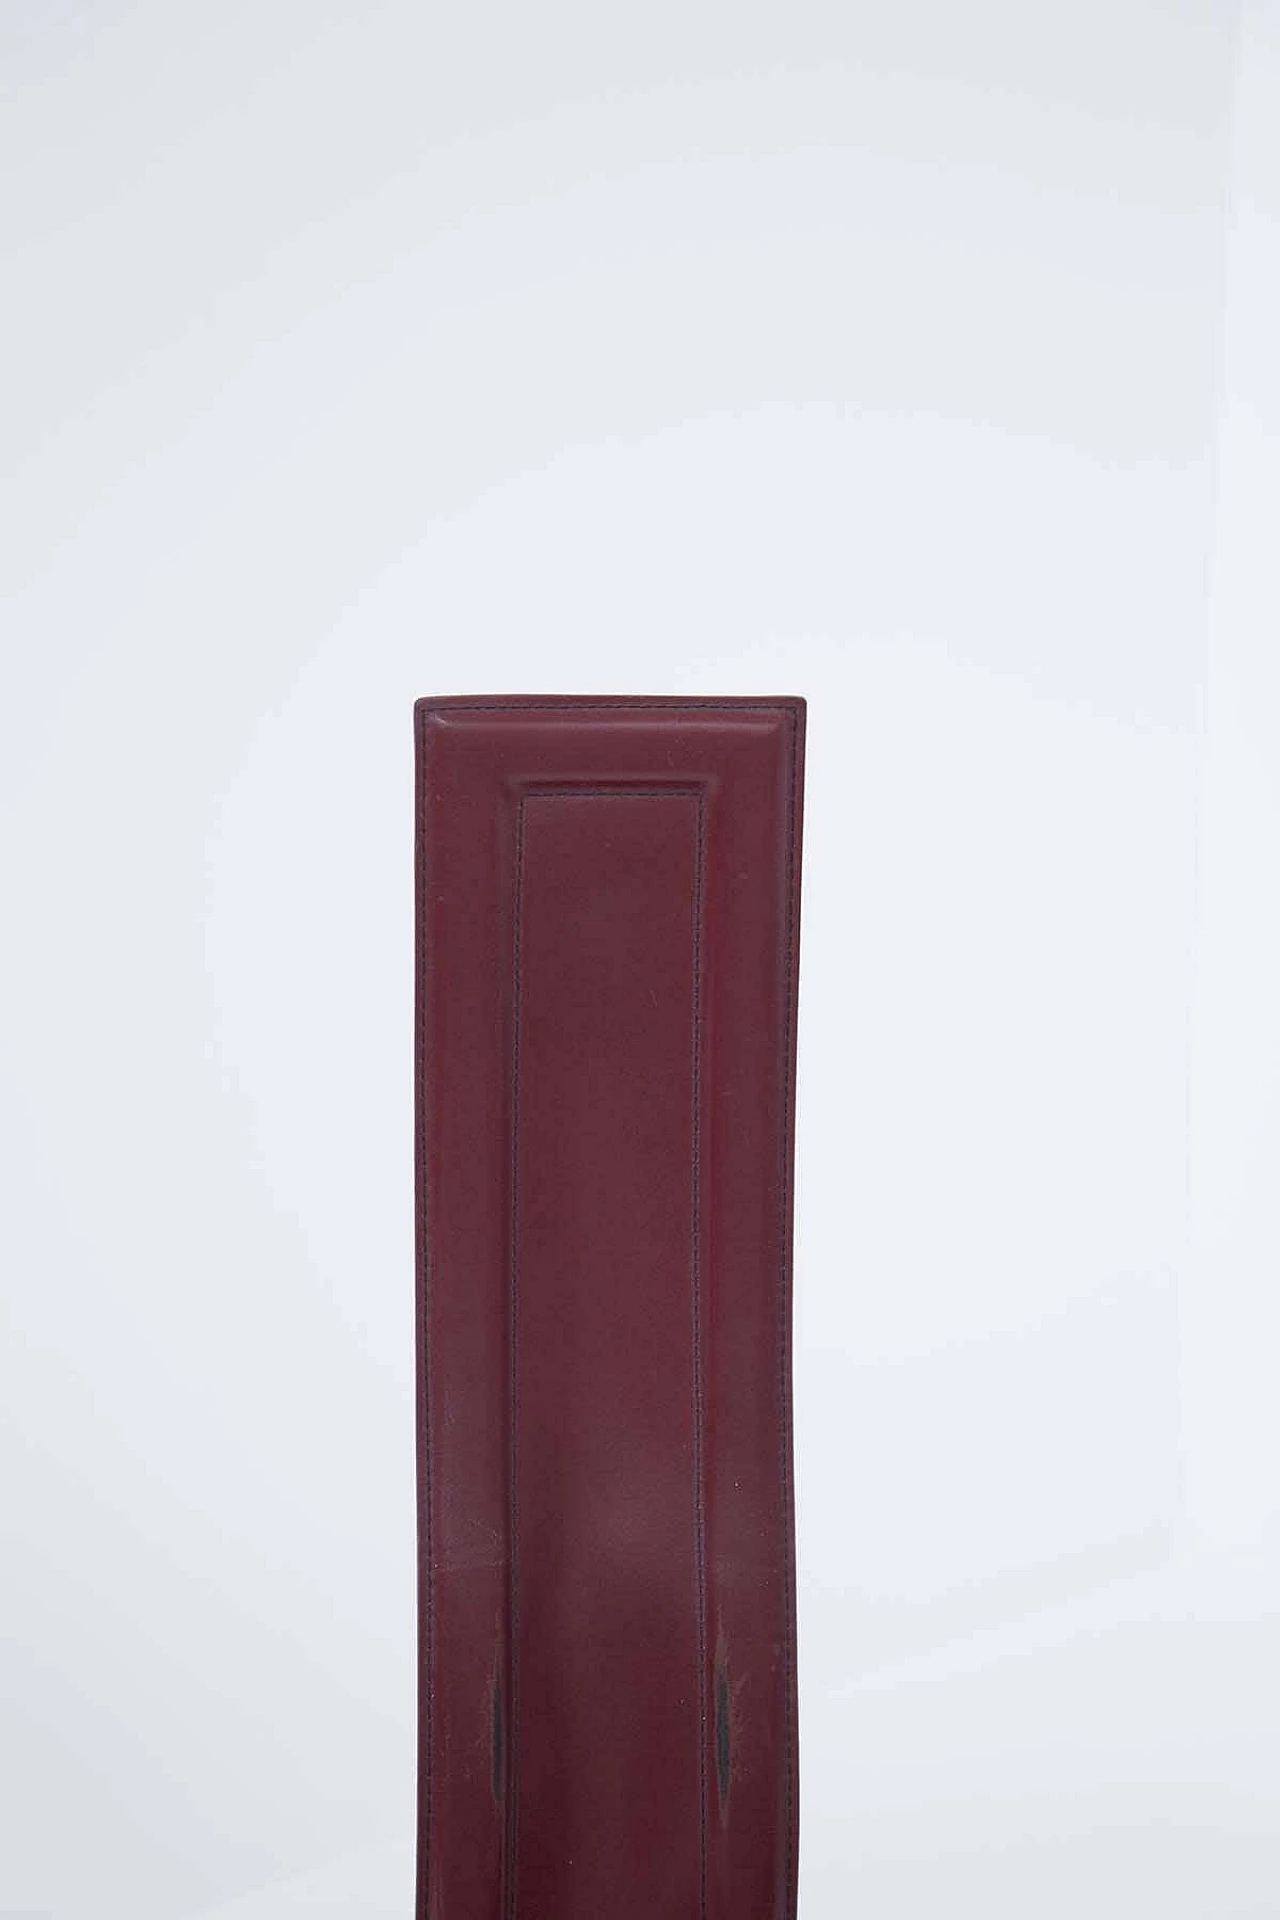 6 burgundy leather table chairs with visible stitching for Cattelan Italia, 1980s 1380231